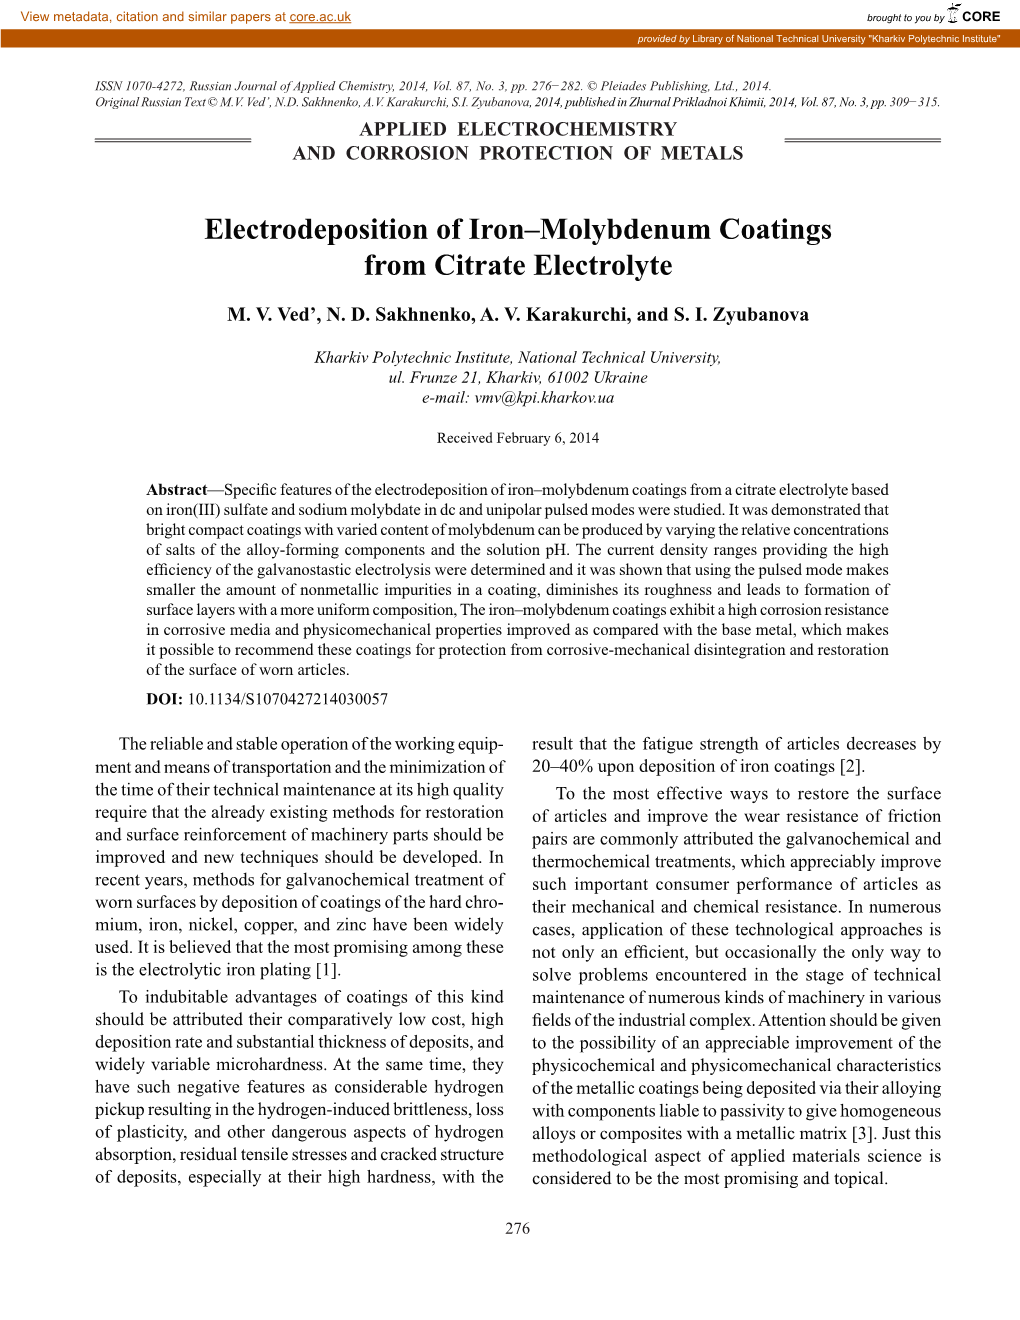 Electrodeposition of Iron–Molybdenum Coatings from Citrate Electrolyte